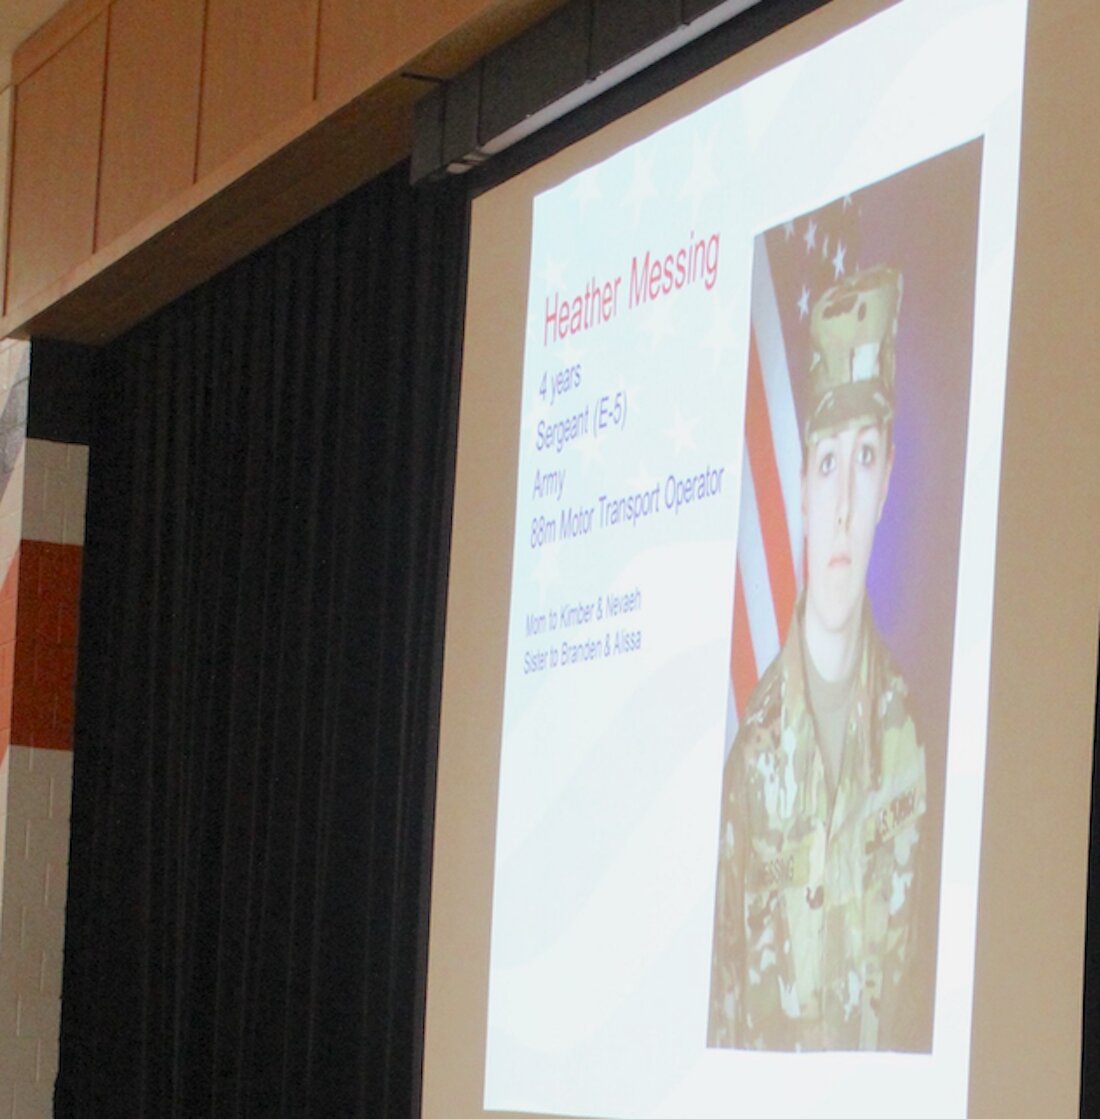 Soldier profiles alternated on the projector screen in the high school gym, often disclosing a family connection to those present.